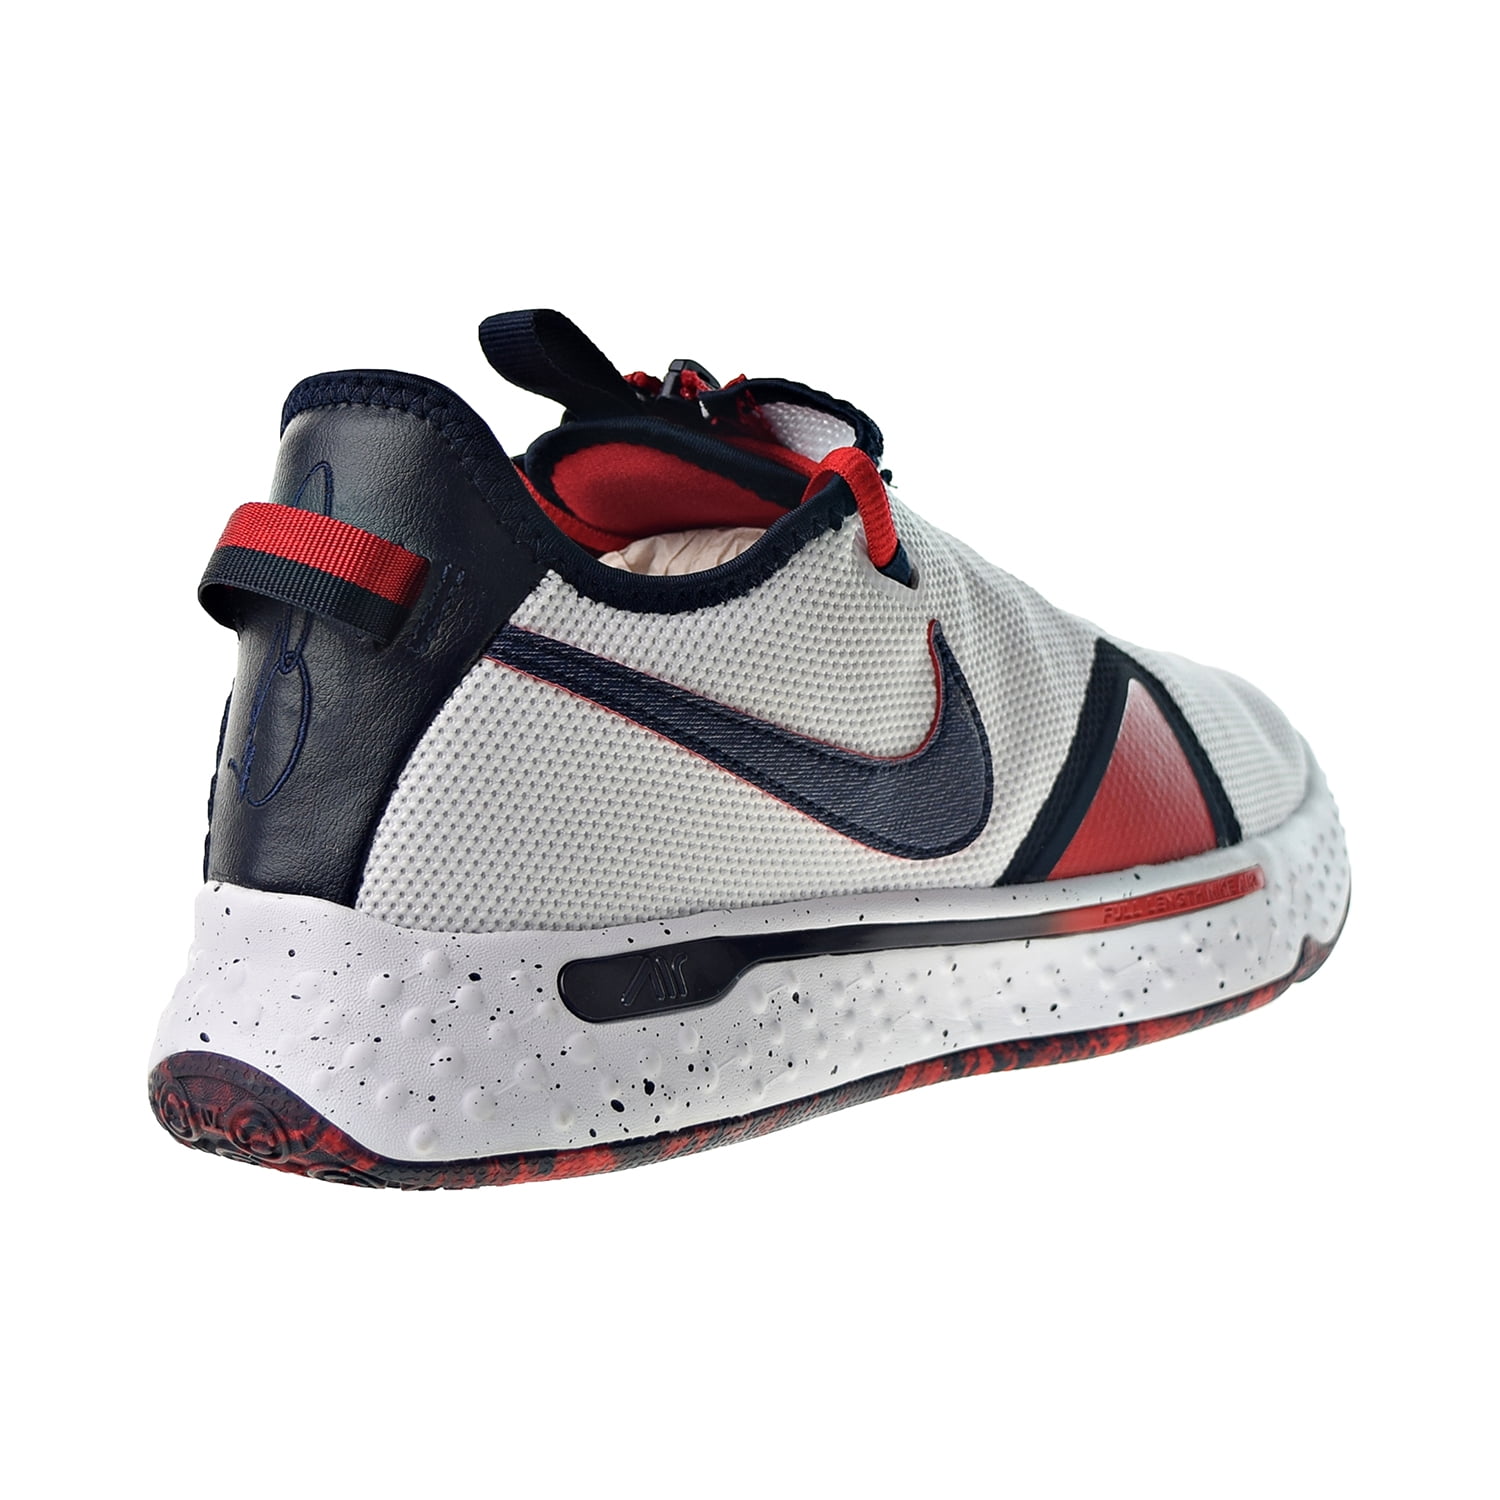 NIKE PG 4 USA PAUL GEORGE CD5079-101 White/Red/Navy Men’s Basketball Shoes  SZ 8